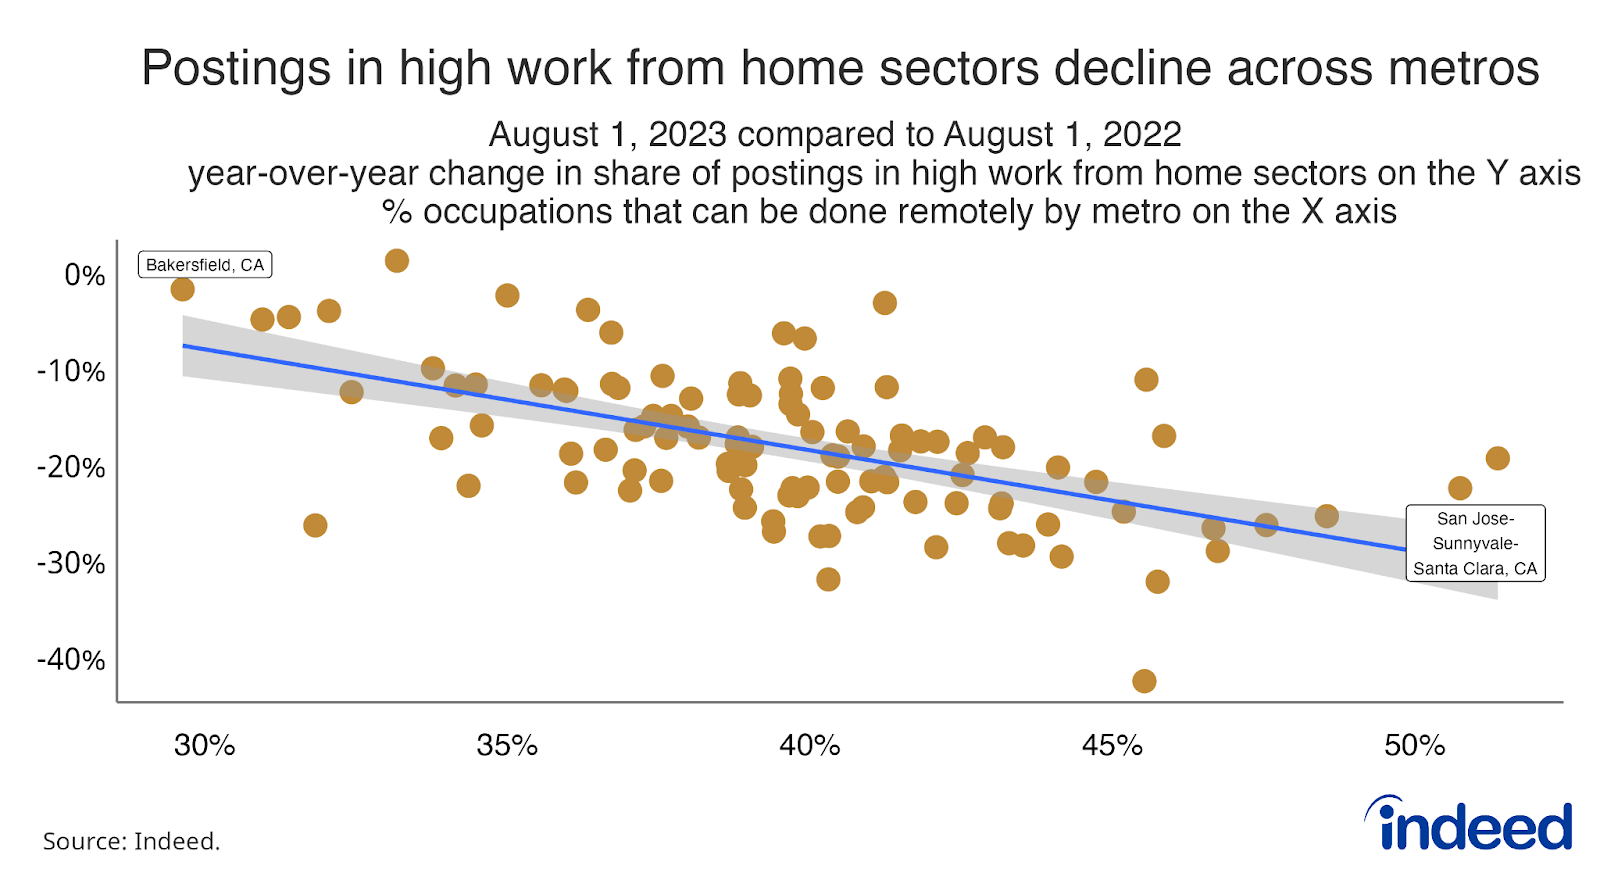 Scatterplot titled “Postings from high work-from-home sectors decline across metros.” The vertical axis ranges from 0 to -40, measuring the year-over-year change in the share of high work-from-home postings, while the horizontal graph ranges from 30% to 50%, and measures the share of a metropolitan area’s jobs that can be done from home. The share of high remote postings has fallen for most metros.